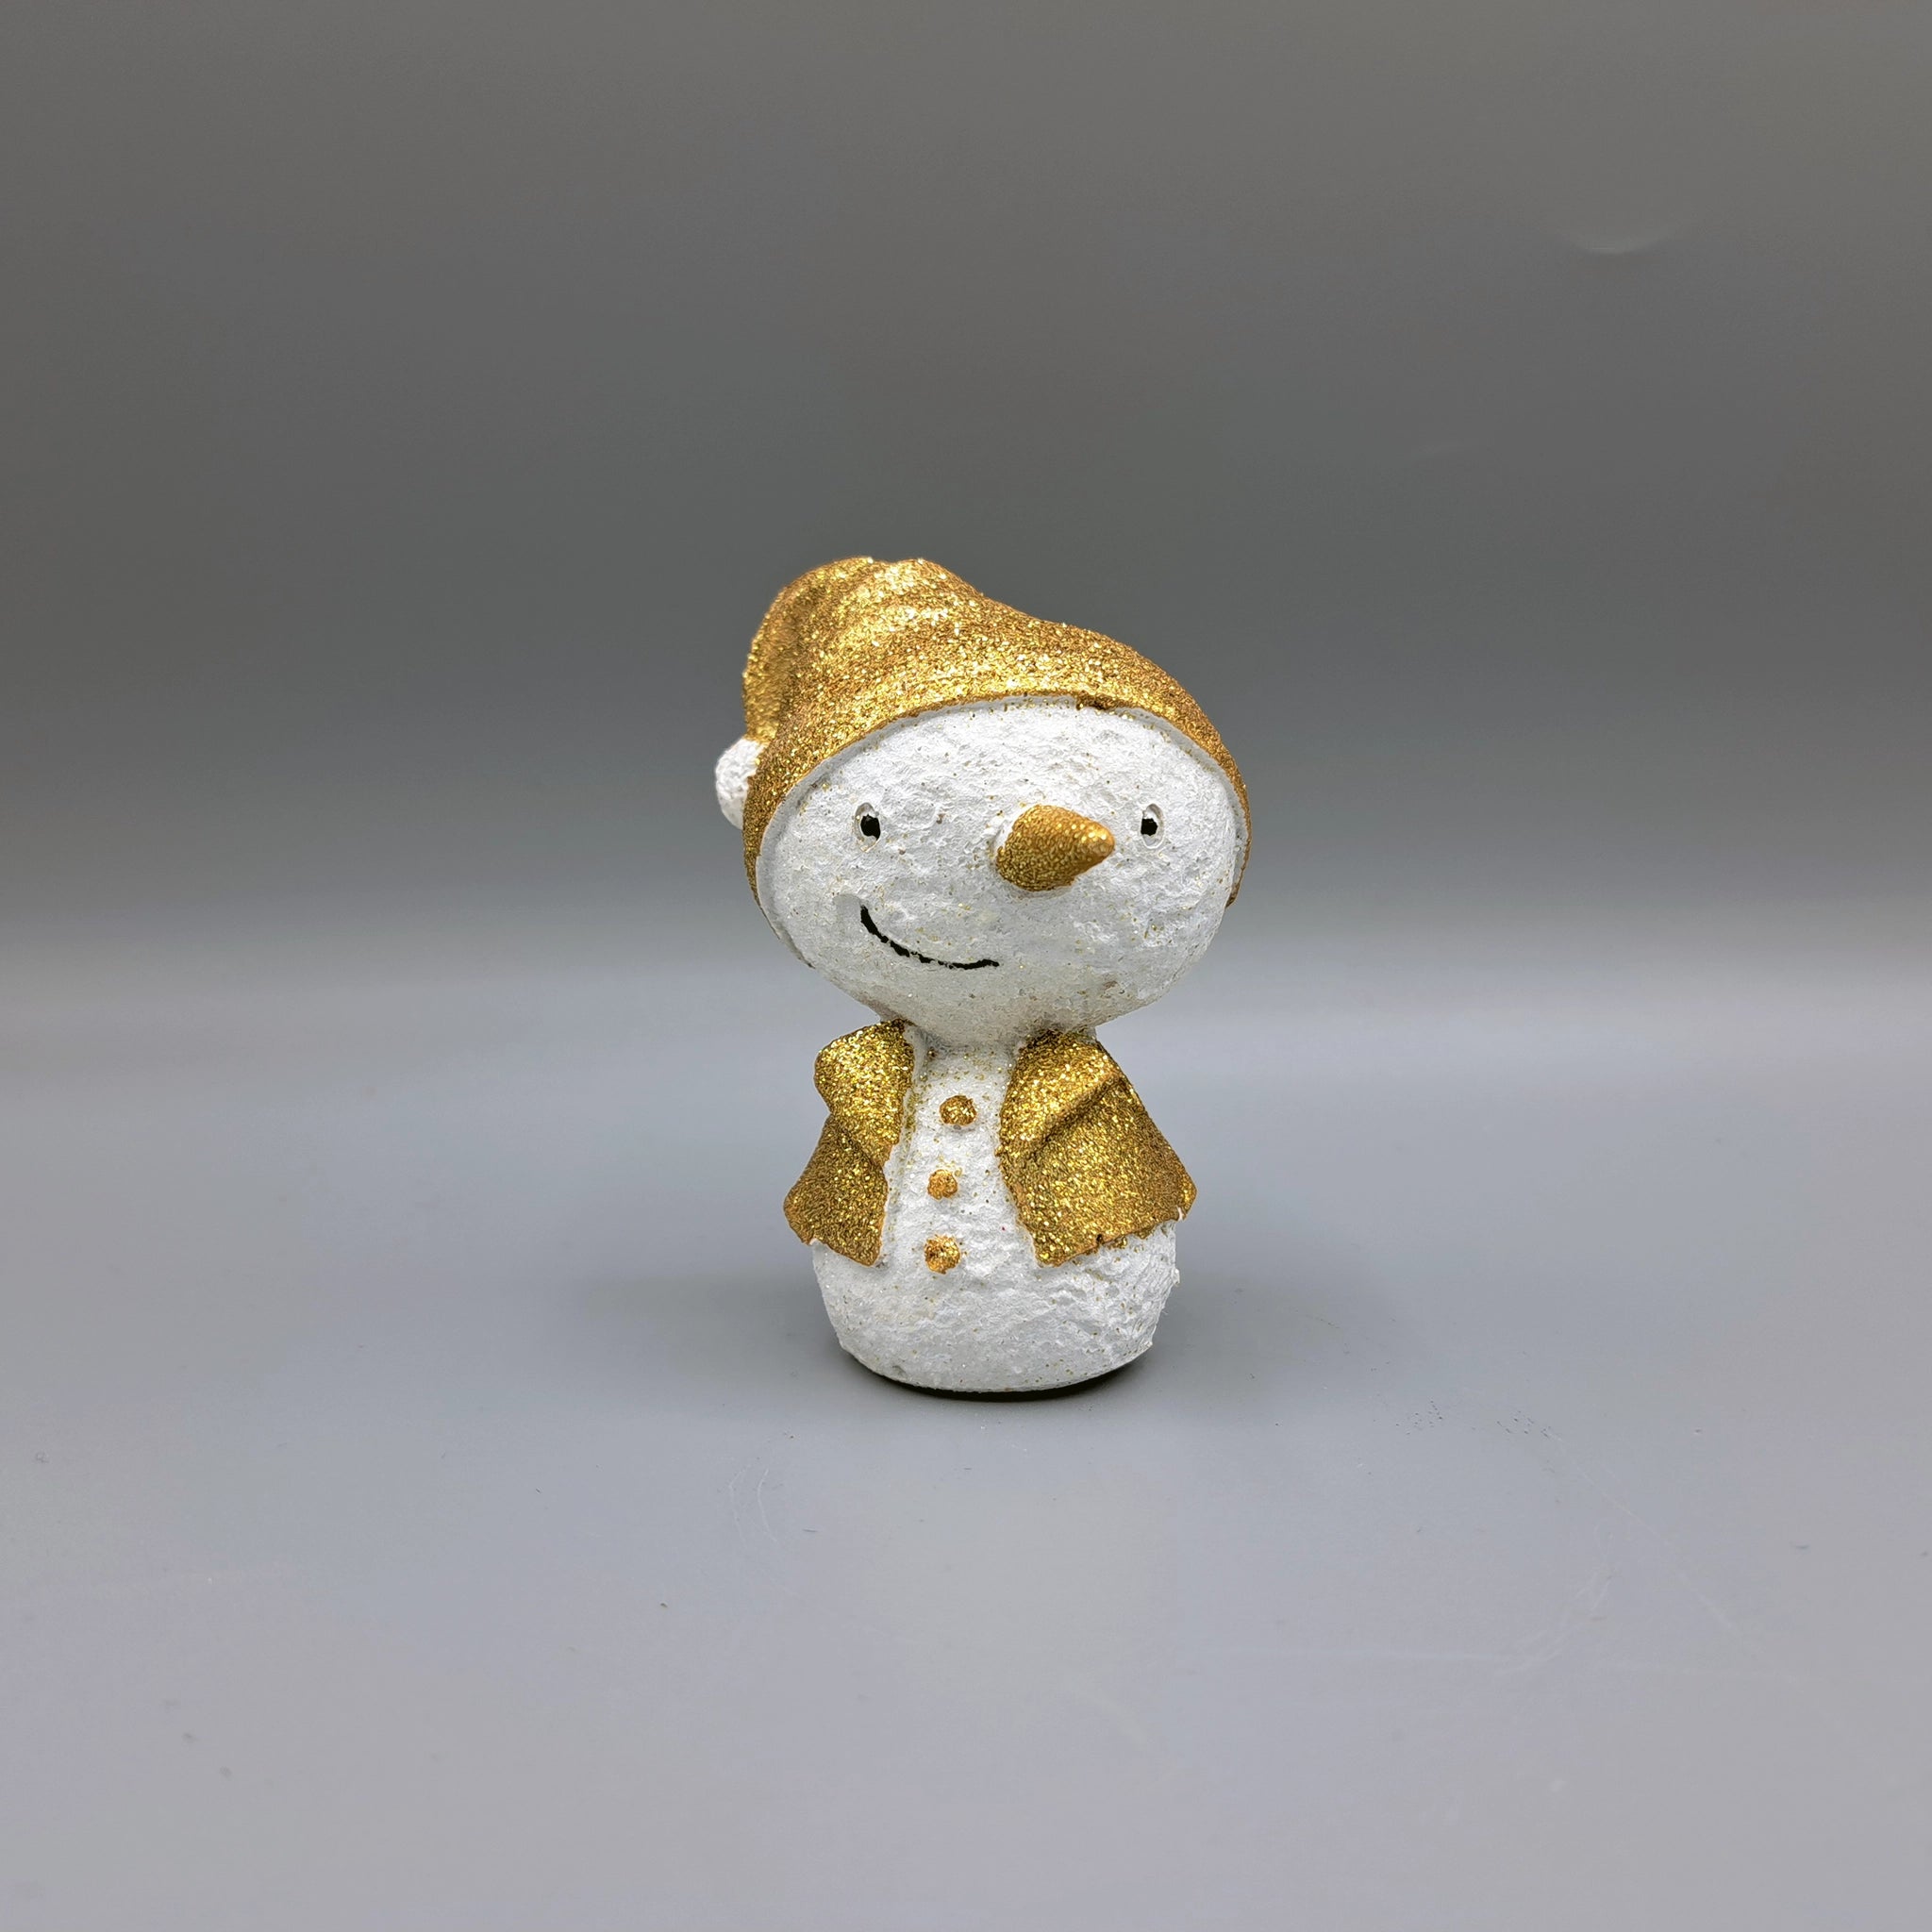 A snowman ornament with gold glitter details wearing a Santa hat and coat